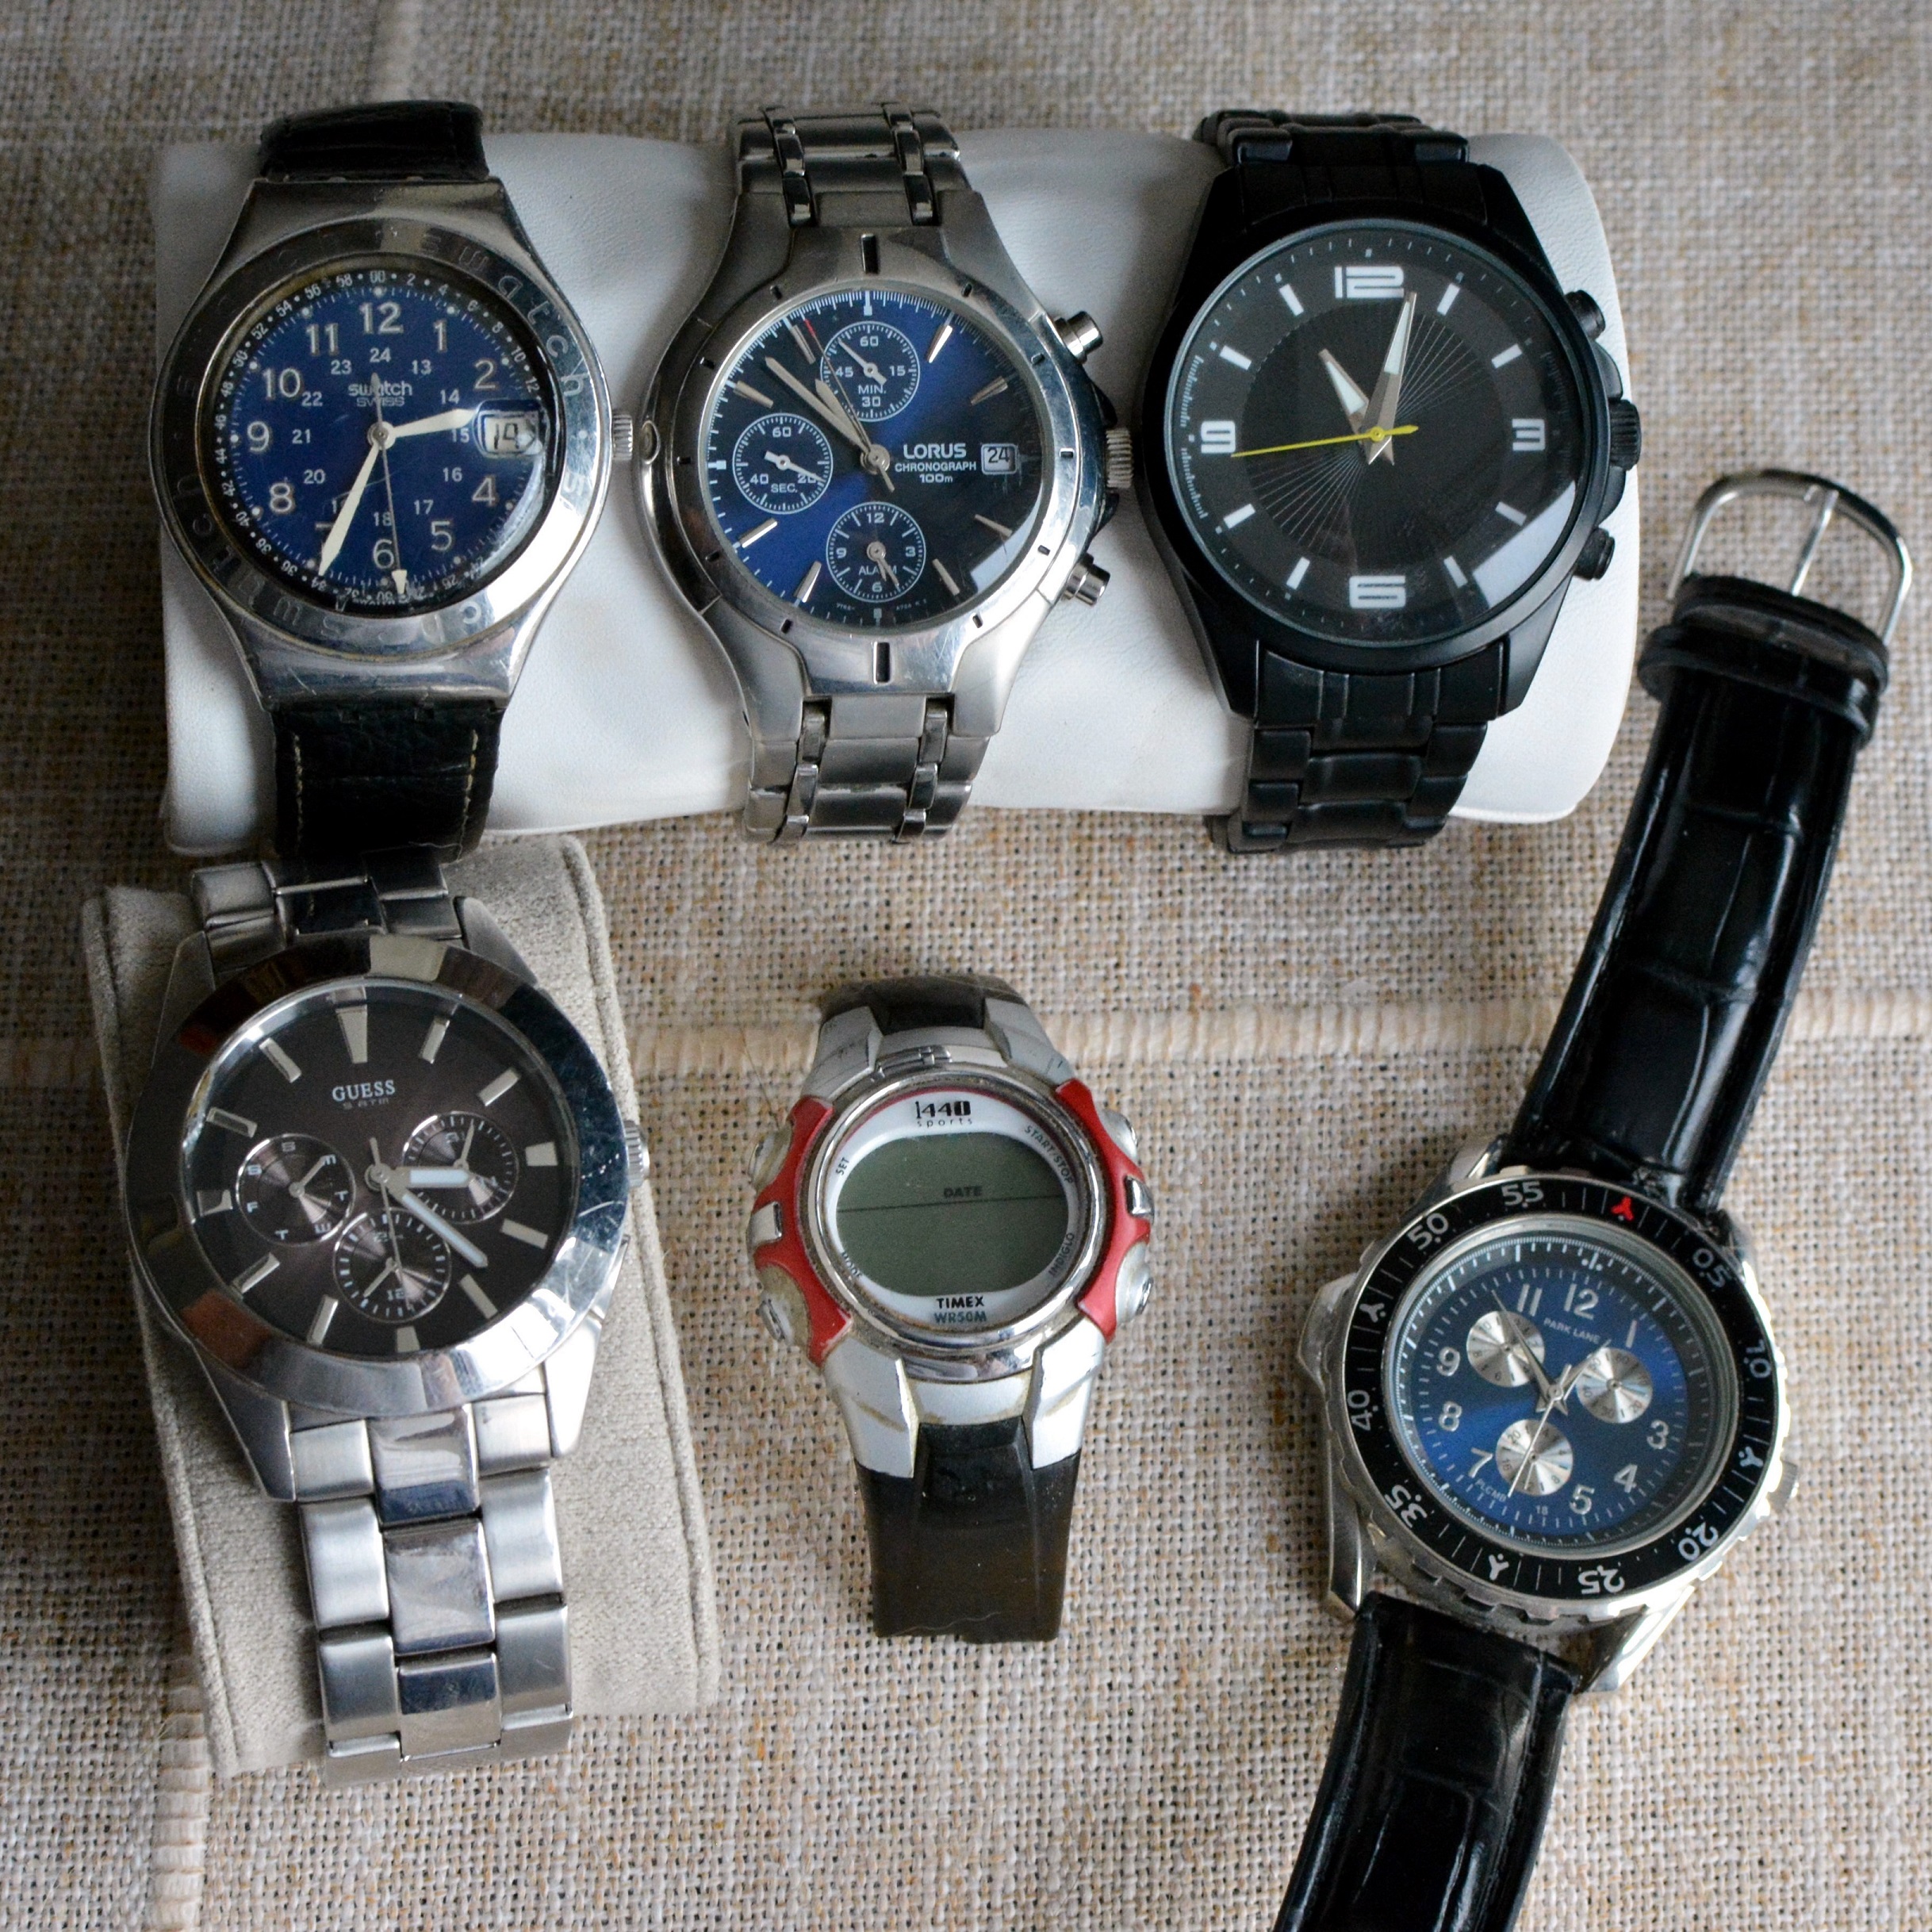 Childhood watch collection